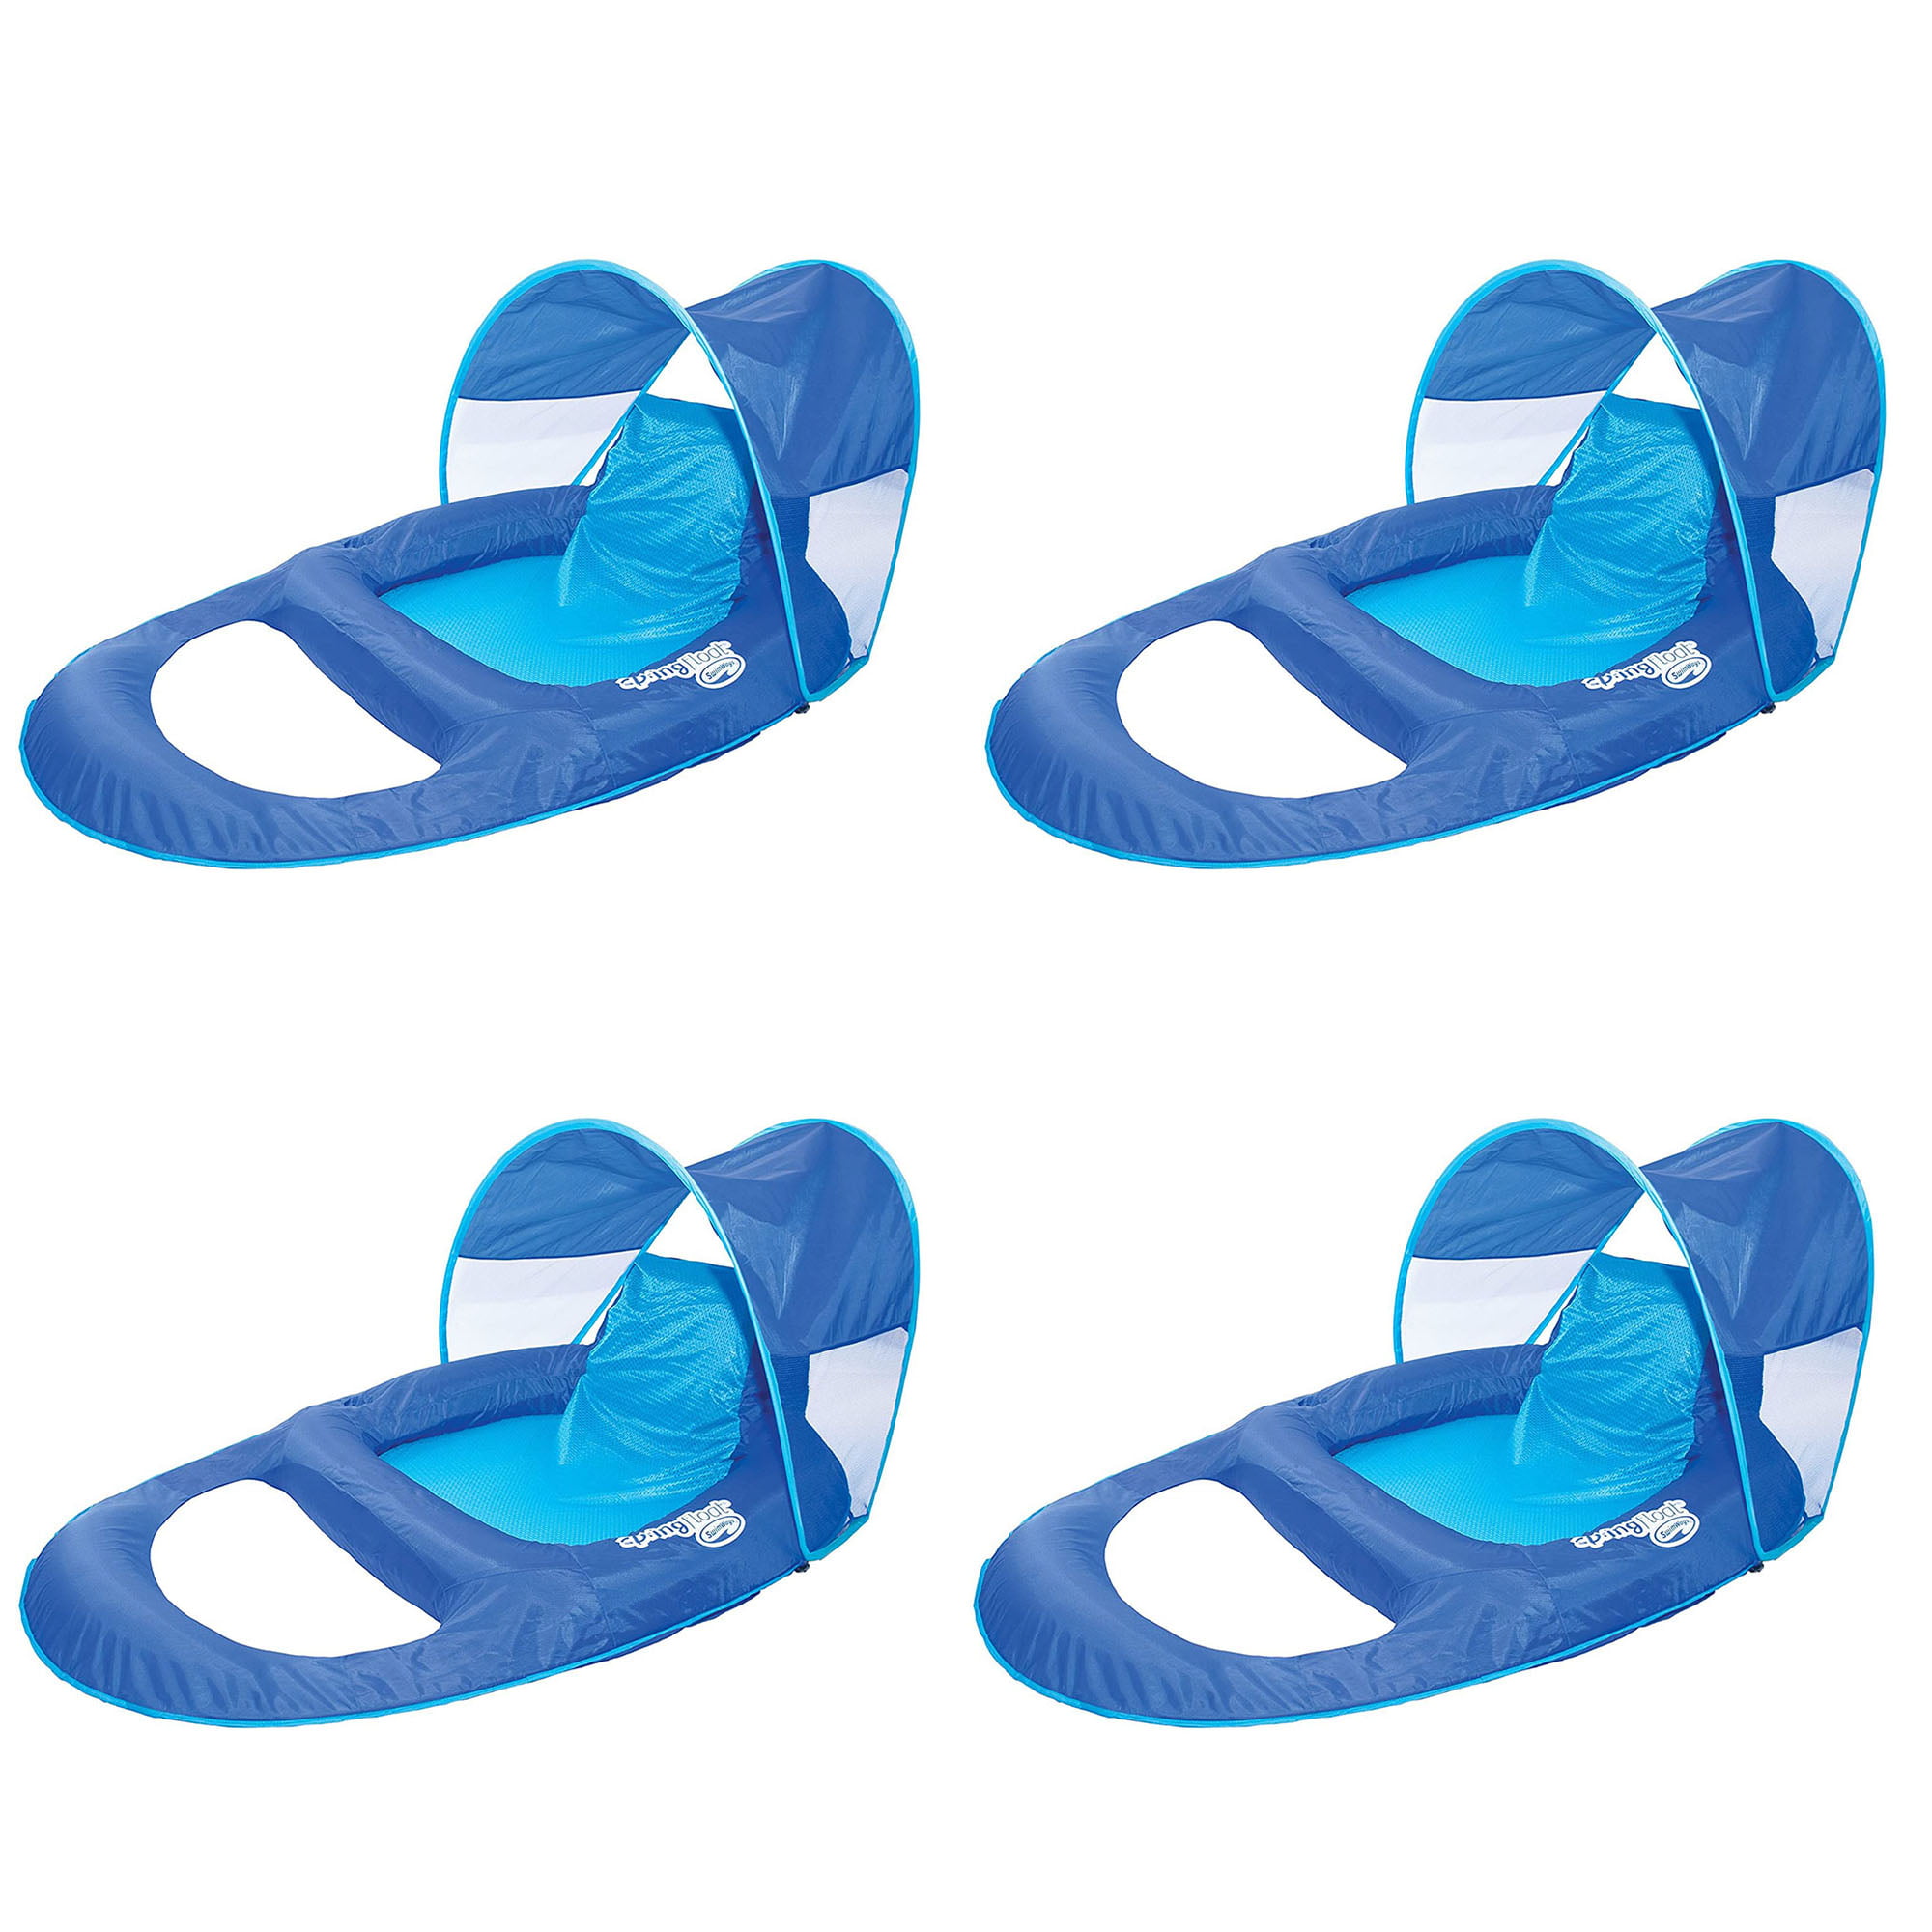 Details about   SwimWays Spring Float SunSeat Pool Summertime Relaxation Lounger Blue 4 Pack 